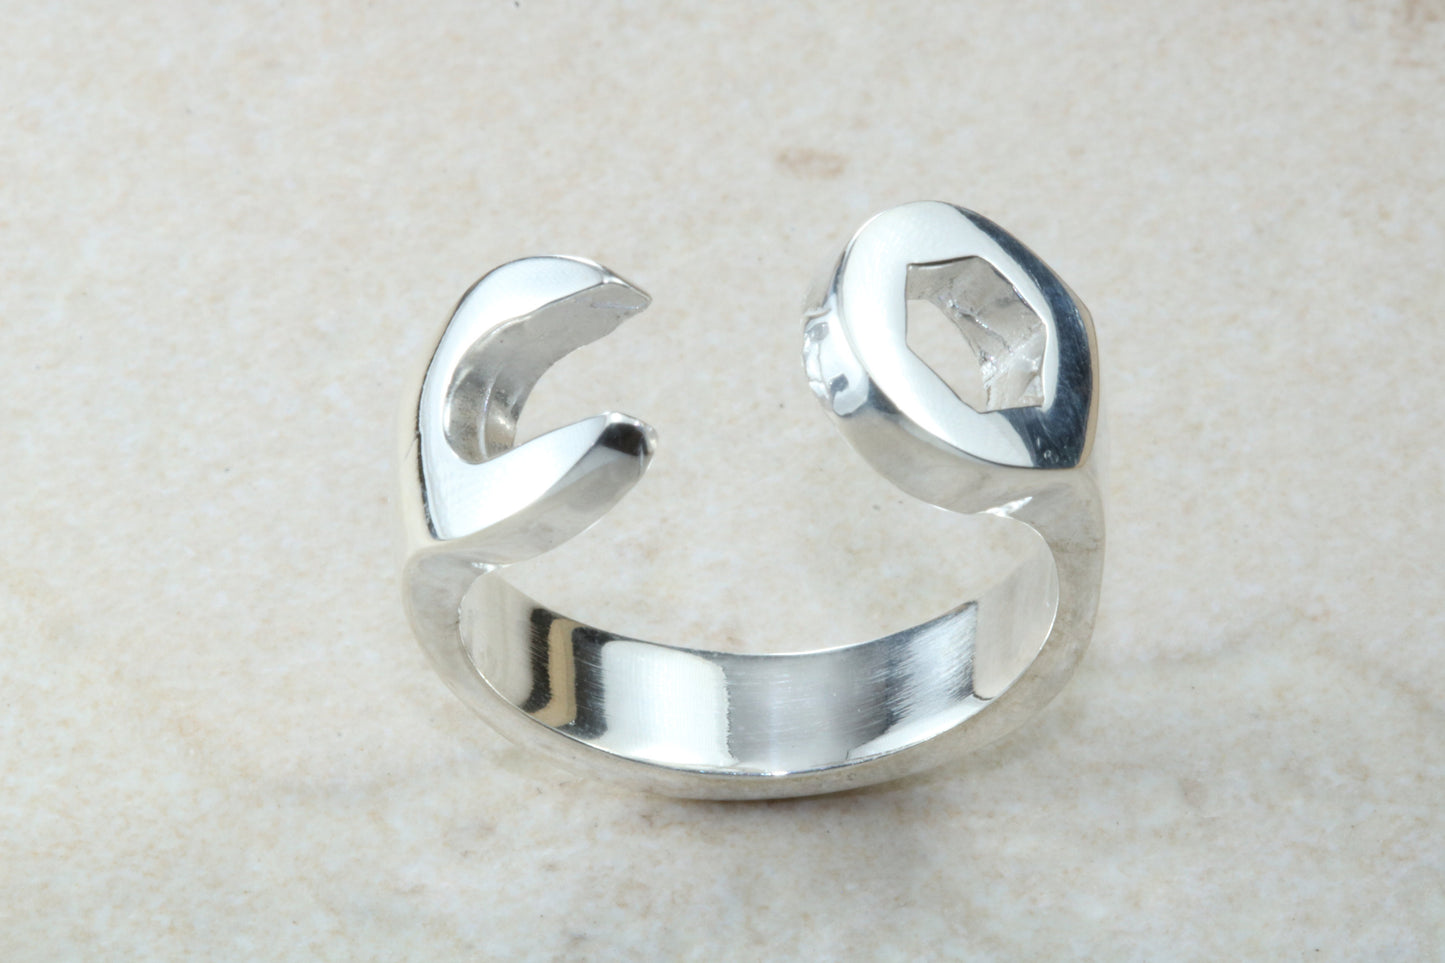 Chunky Spanner ring, solid silver, suitable for ladies or gents. Available in silver, yellow gold, white gold and platinum